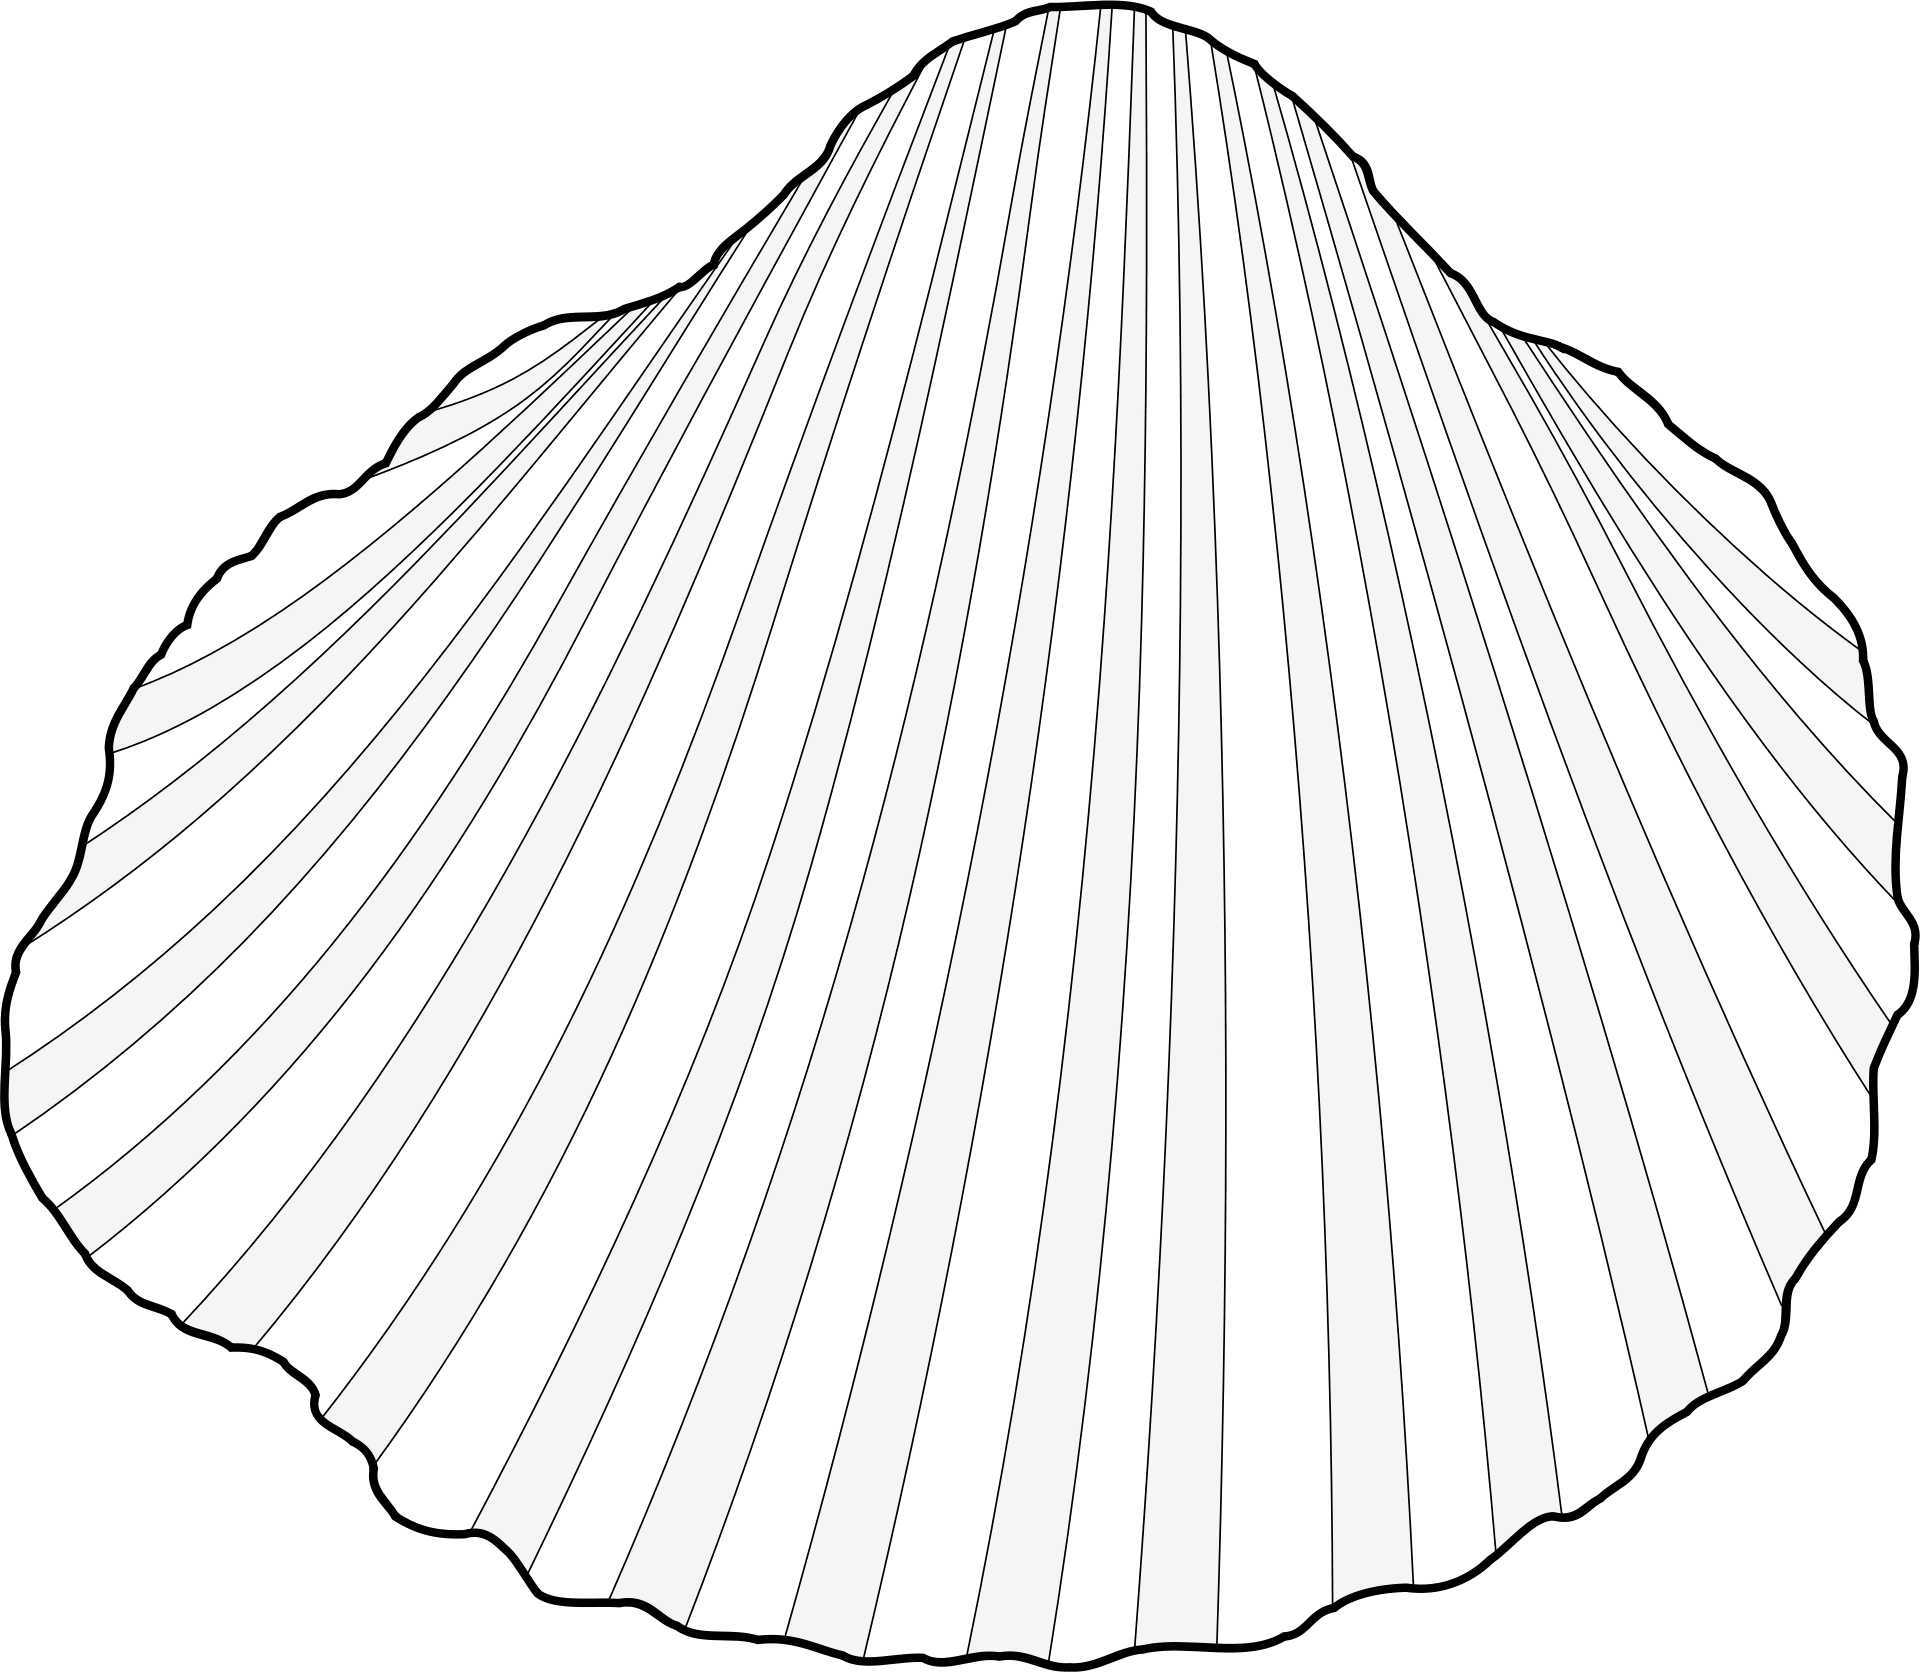 Clam shell clipart vector image photo